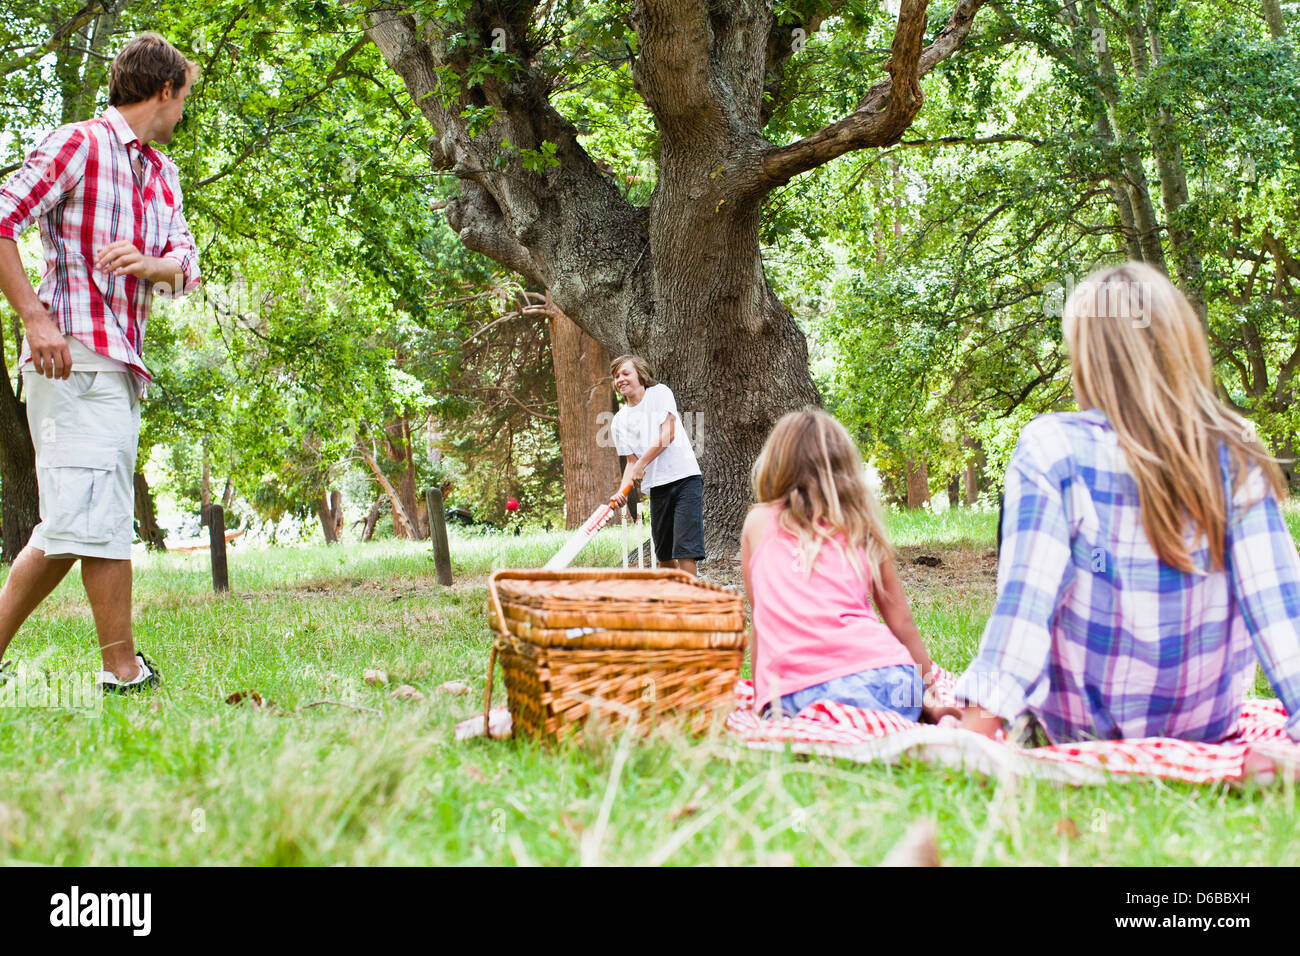 Family relaxing together in park Stock Photo